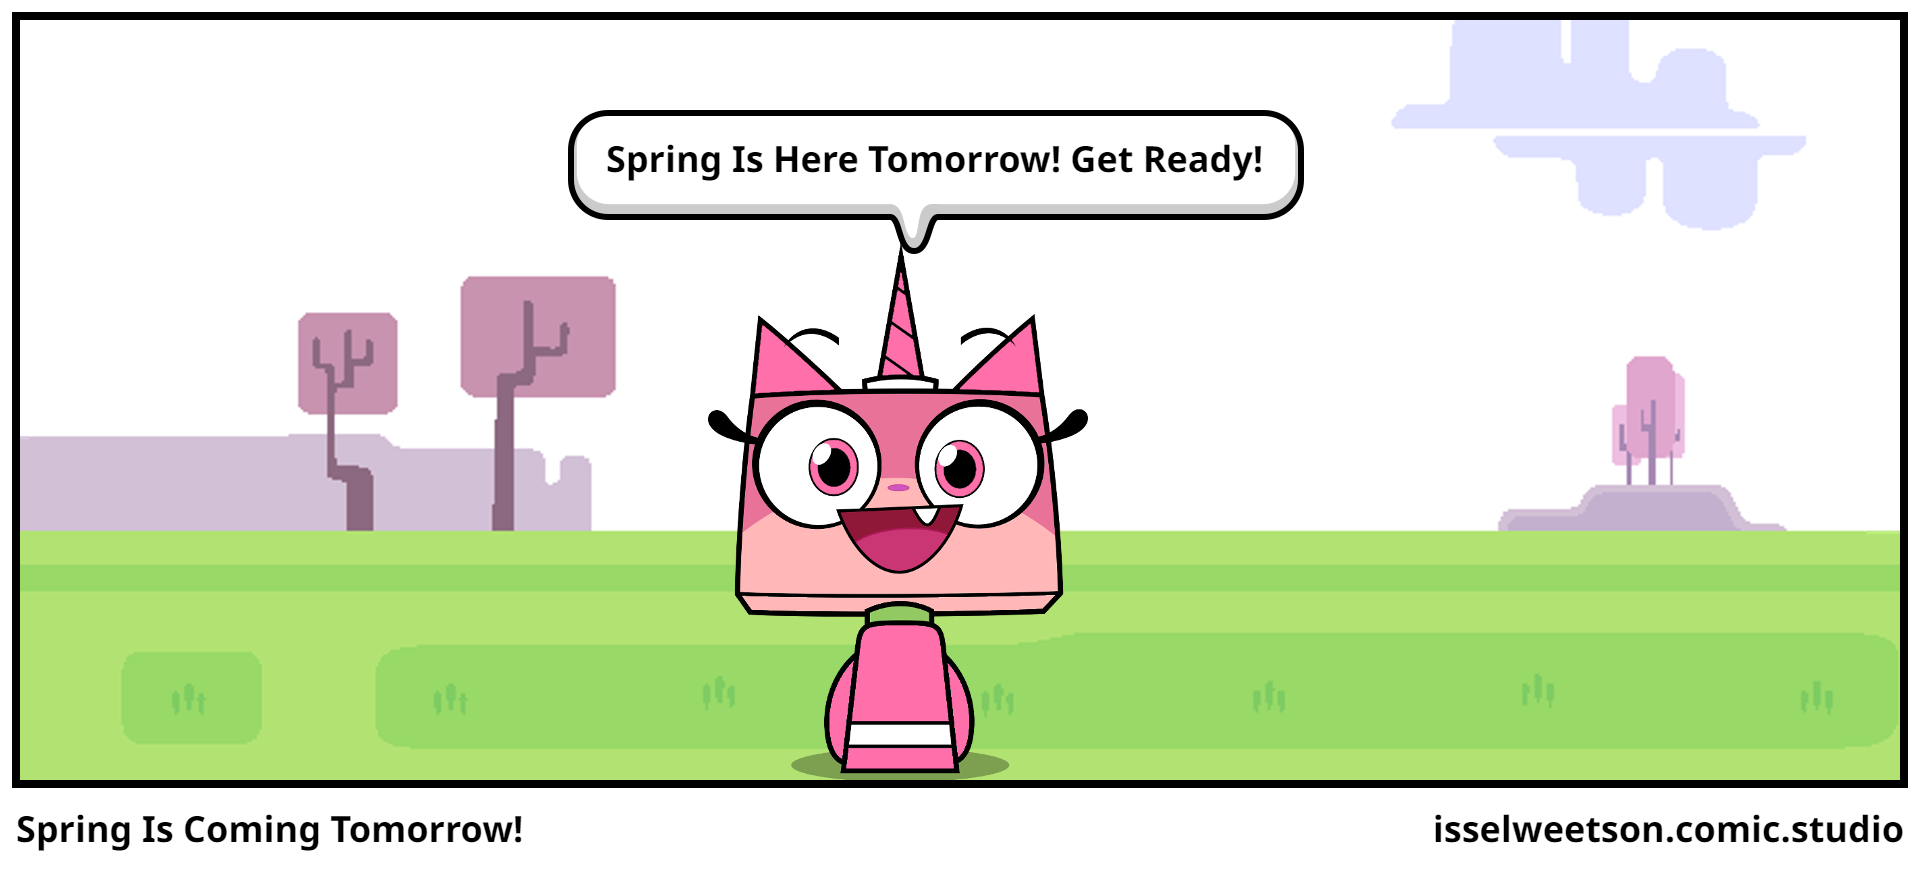 Spring Is Coming Tomorrow!